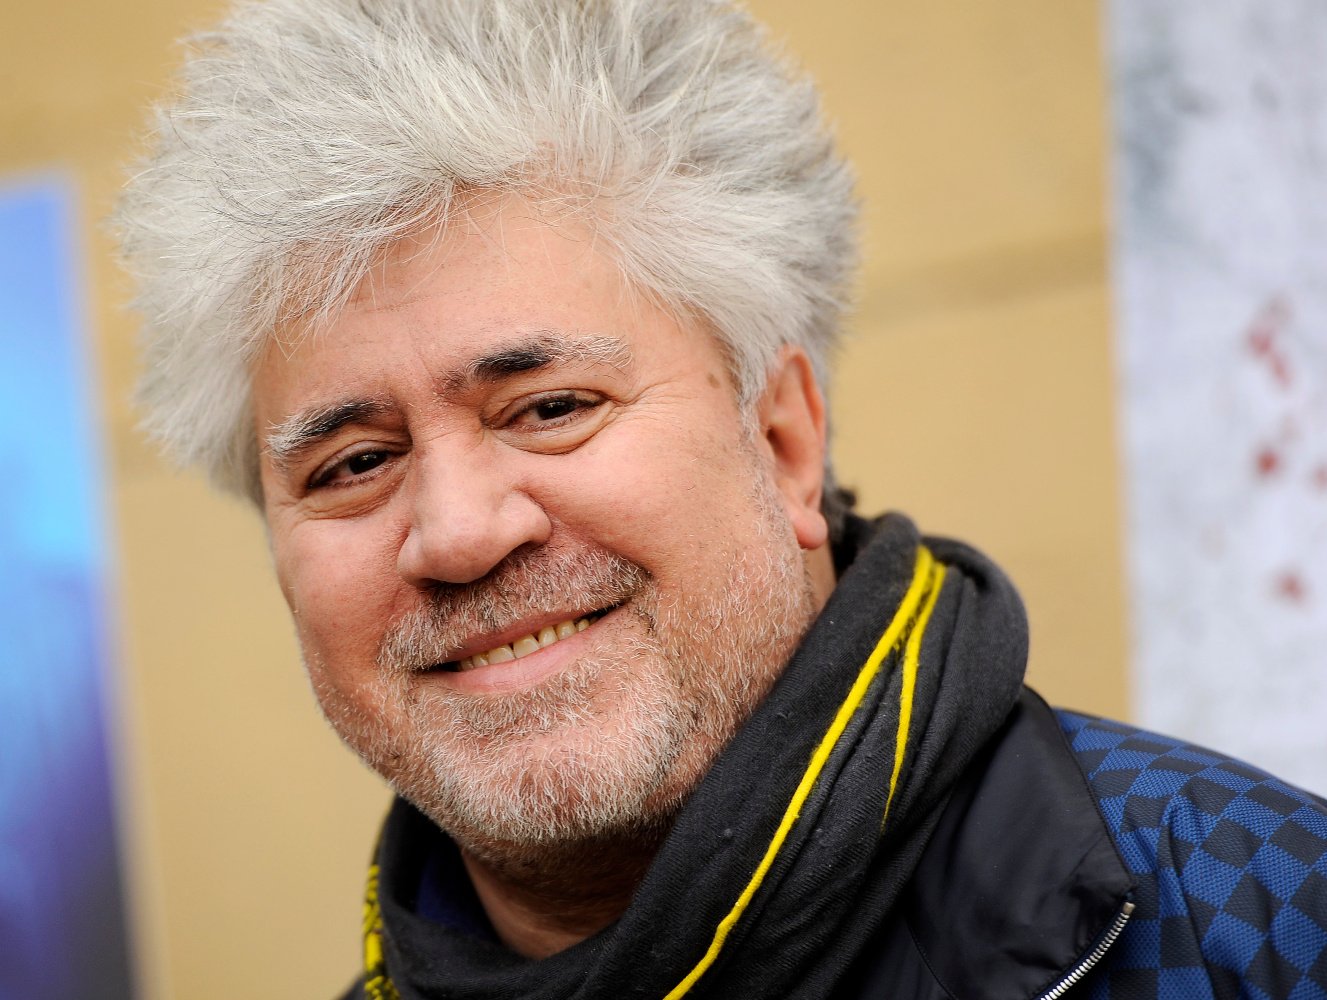 Pedro Almodóvar Caballero is a Spanish film director, screenwriter, producer and former actor